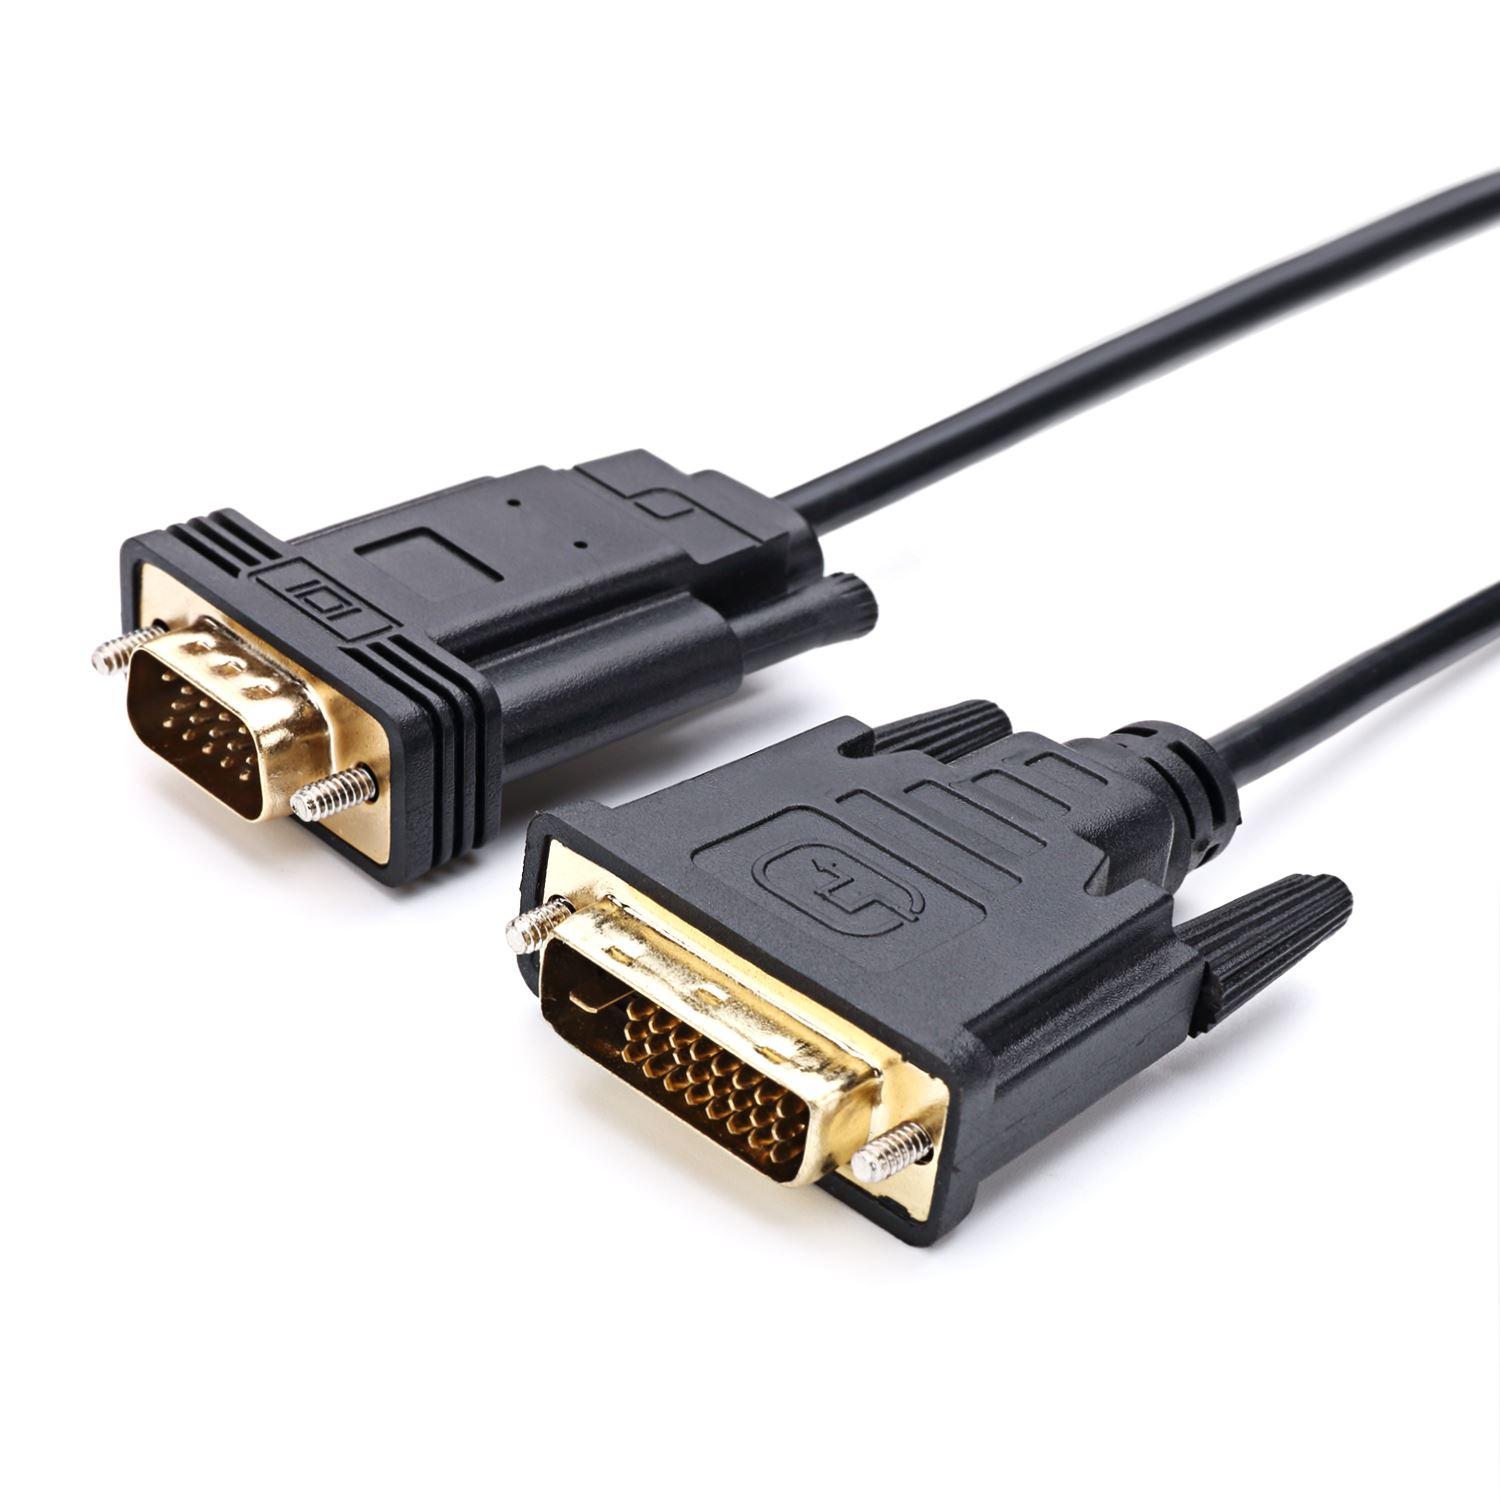 2m Dvi 24+1 Dvi D Source To Vga Male Sink Active Converter Cable For ...